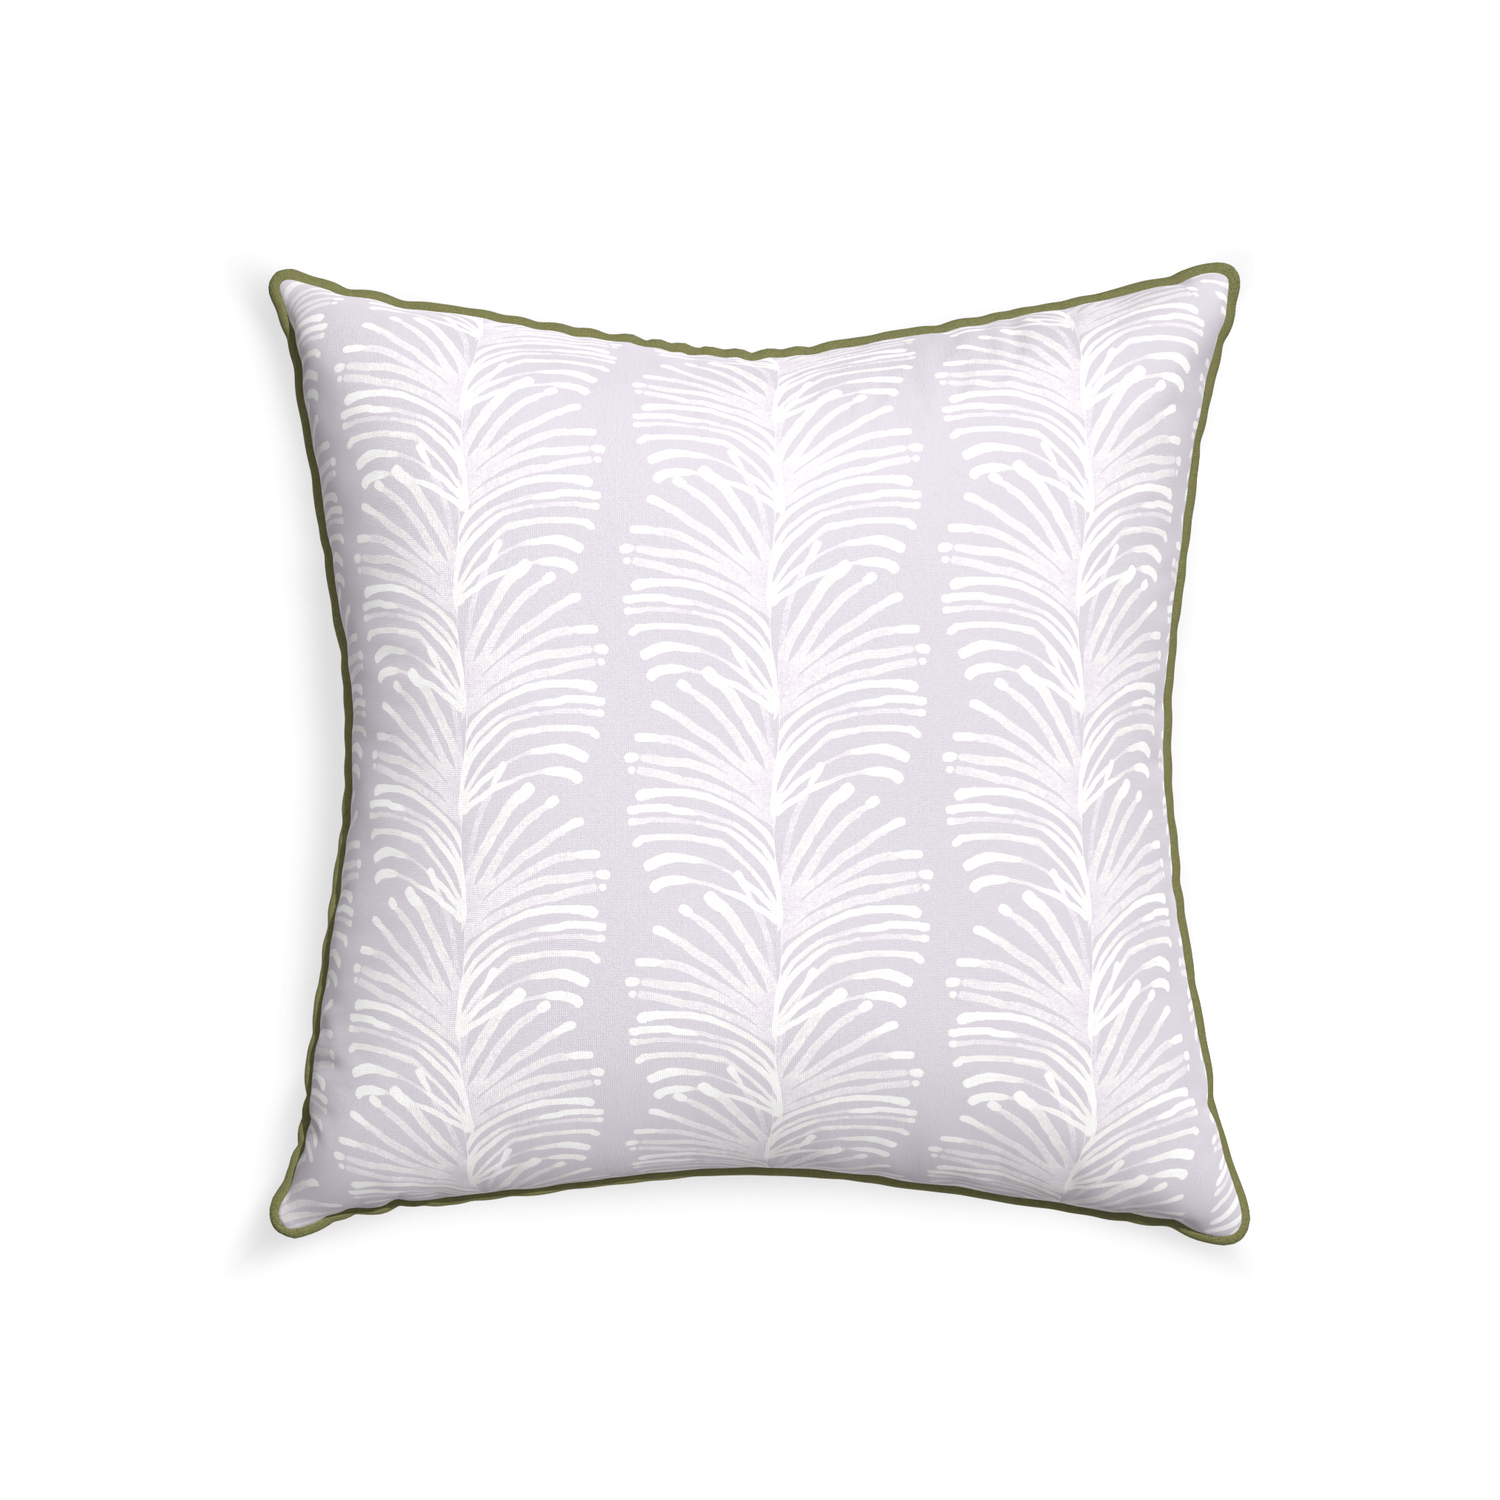 22-square emma lavender custom pillow with moss piping on white background